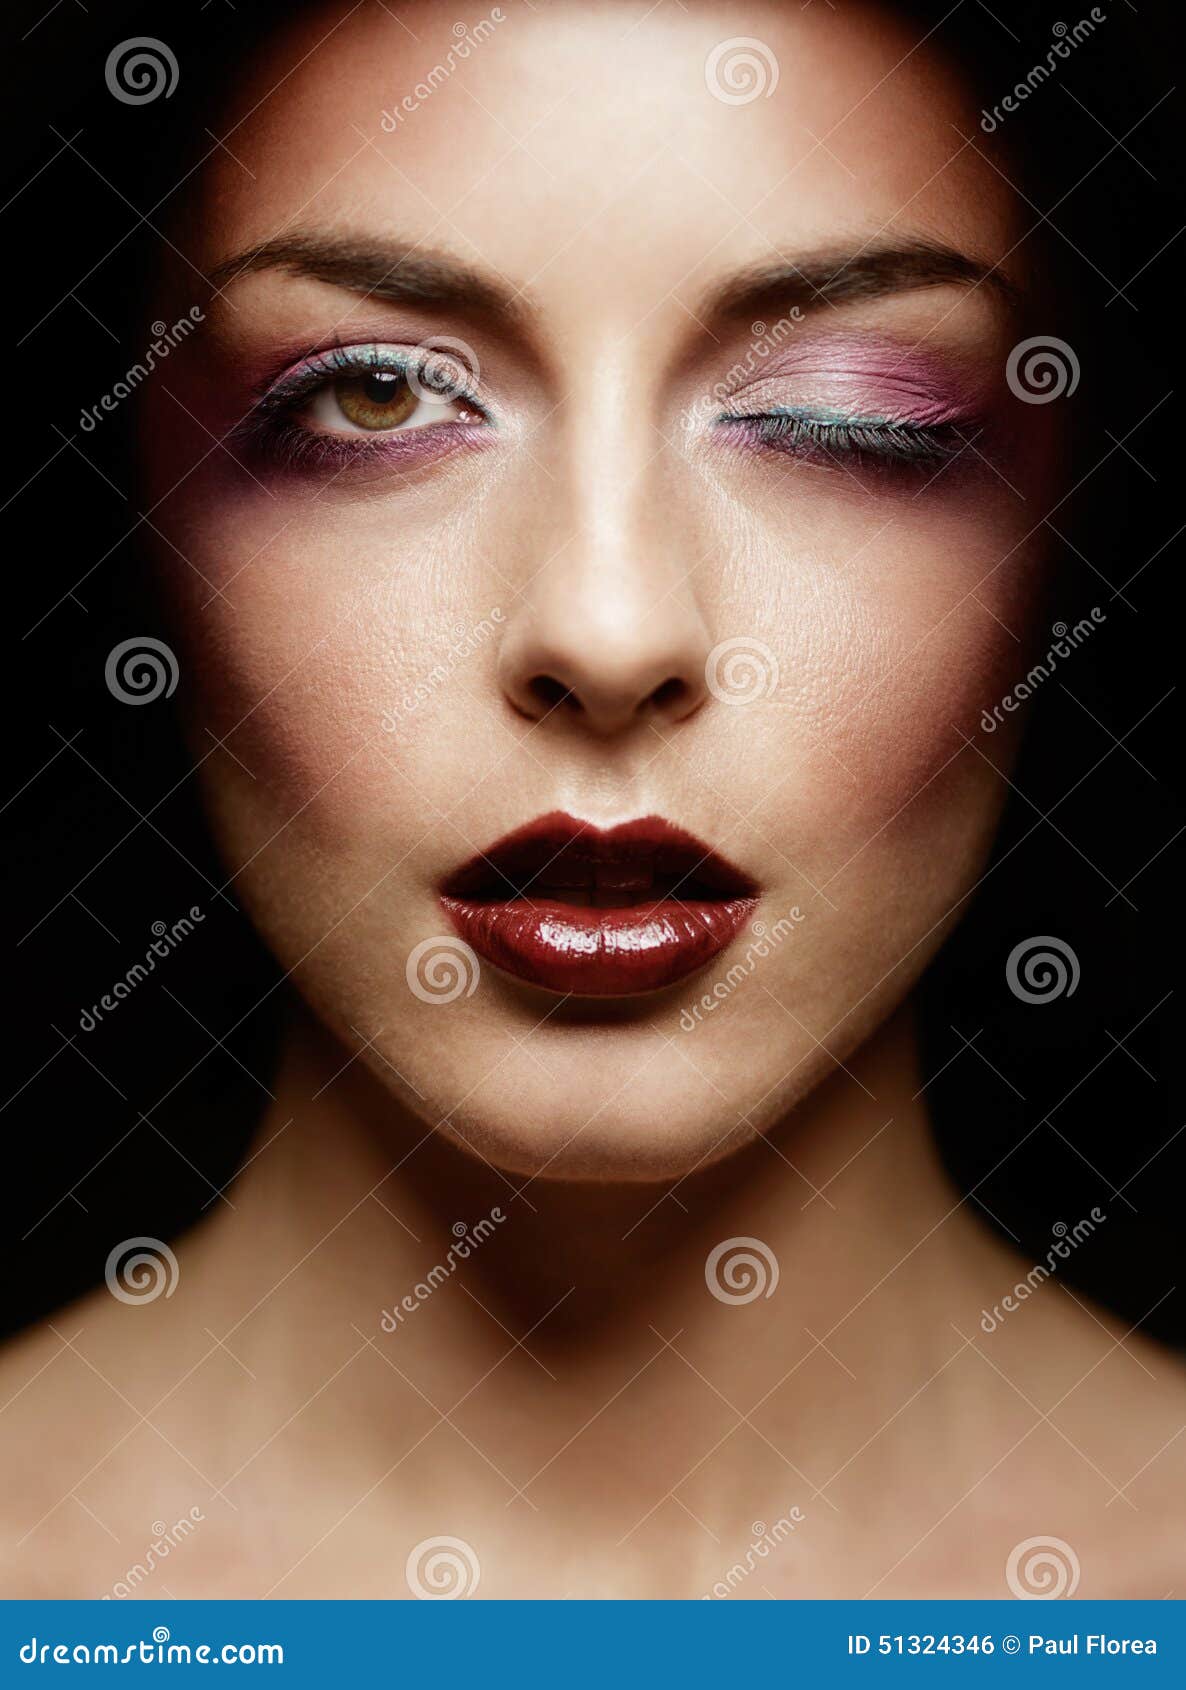 Makeup fashion face chart stock photo. Image of delight - 51324346